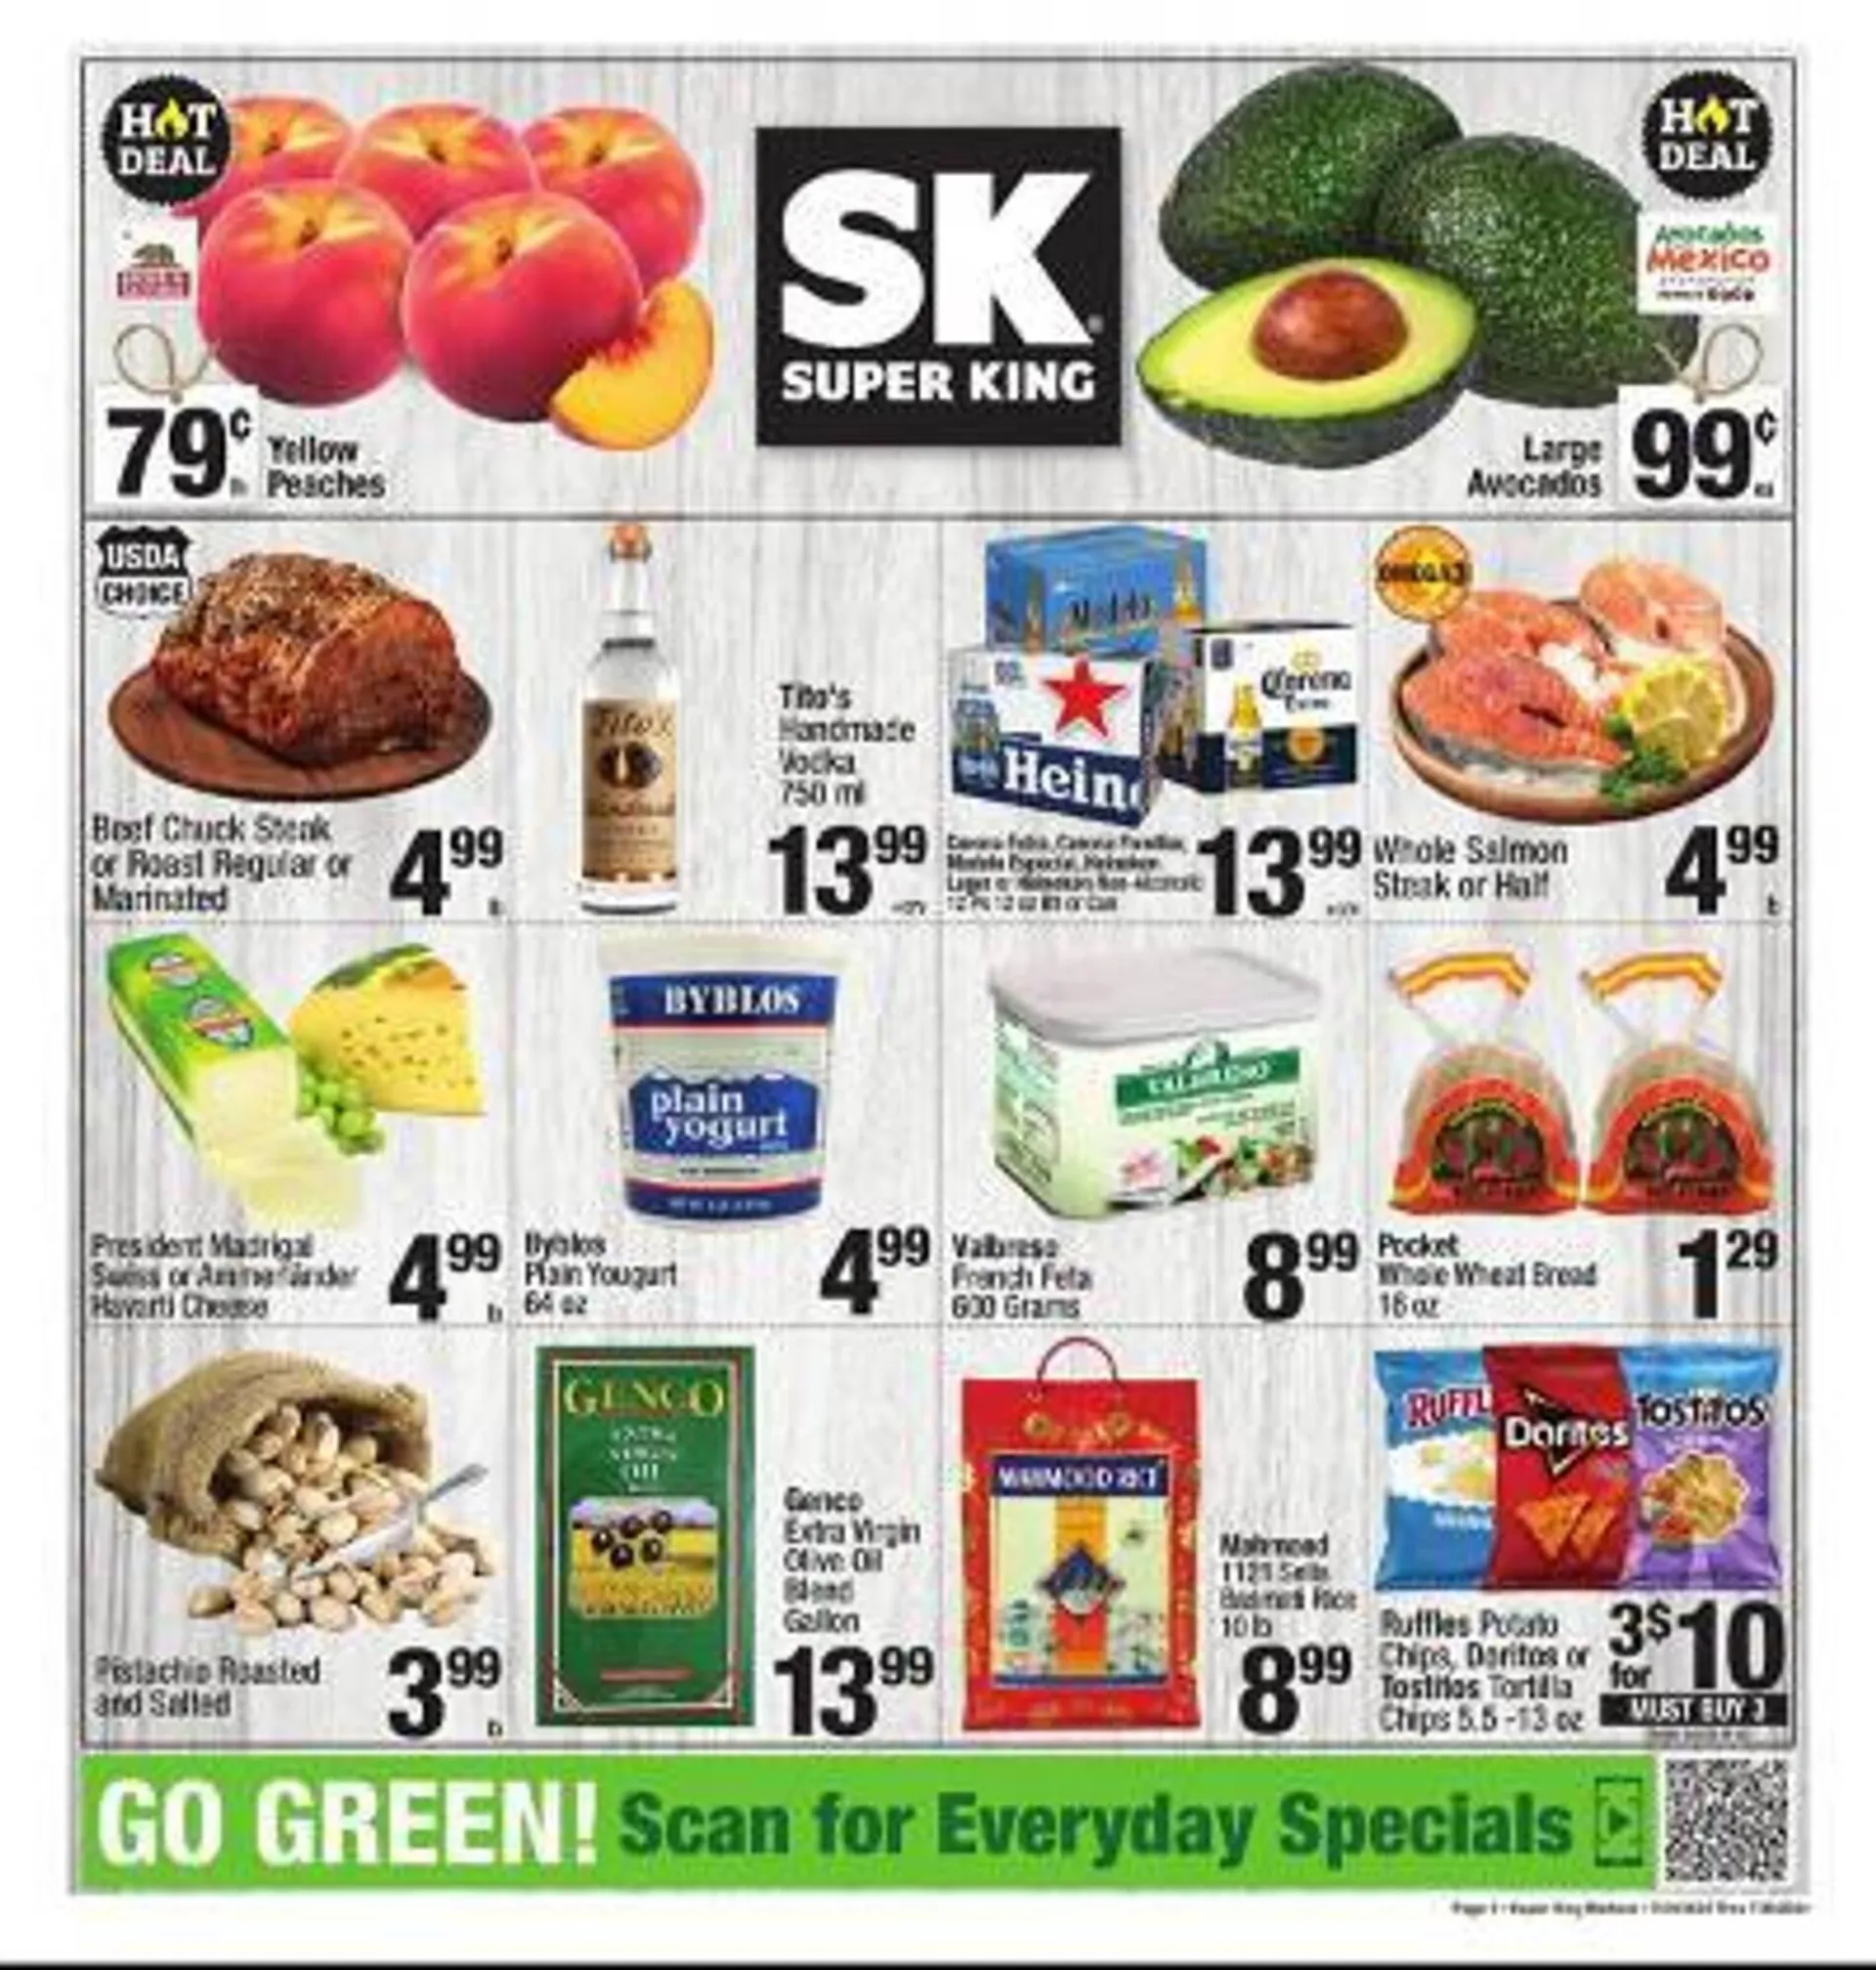 Super King Markets Weekly Ad - 1